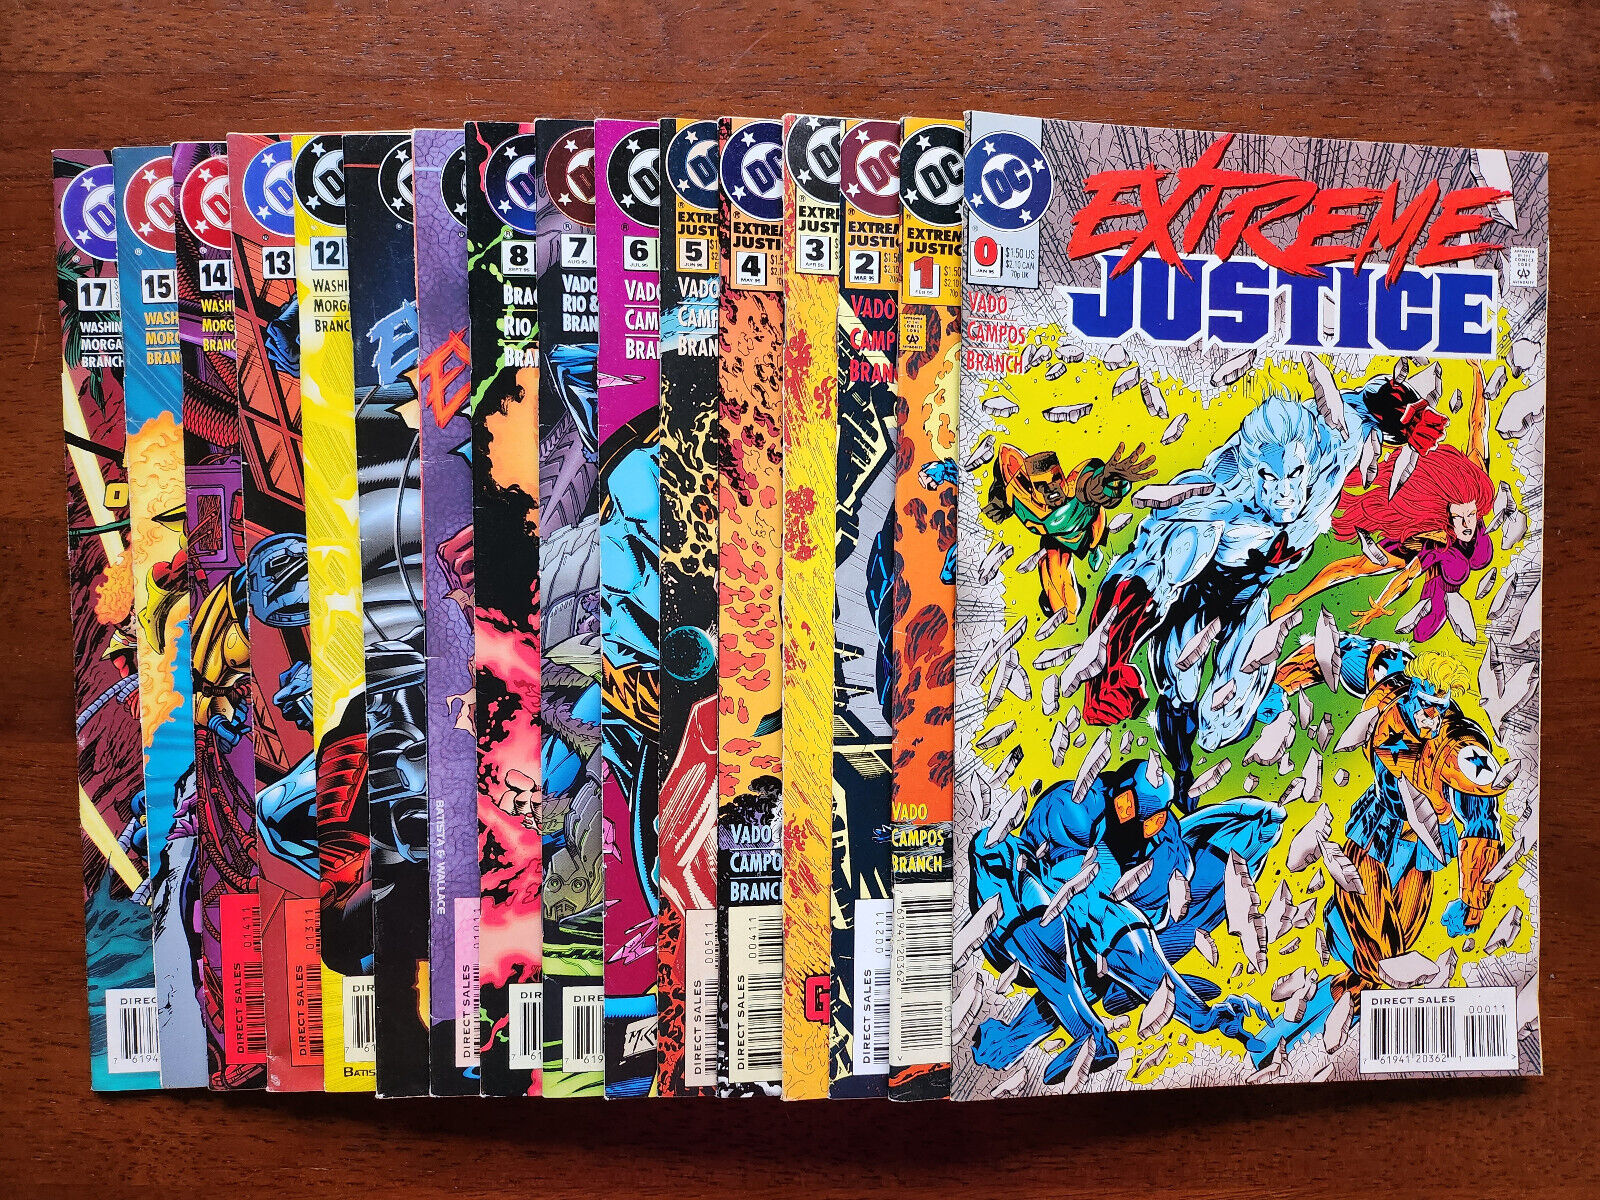 Extreme Justice #0-8, 10-15, 17 (1995 DC) Lot of 16 issues